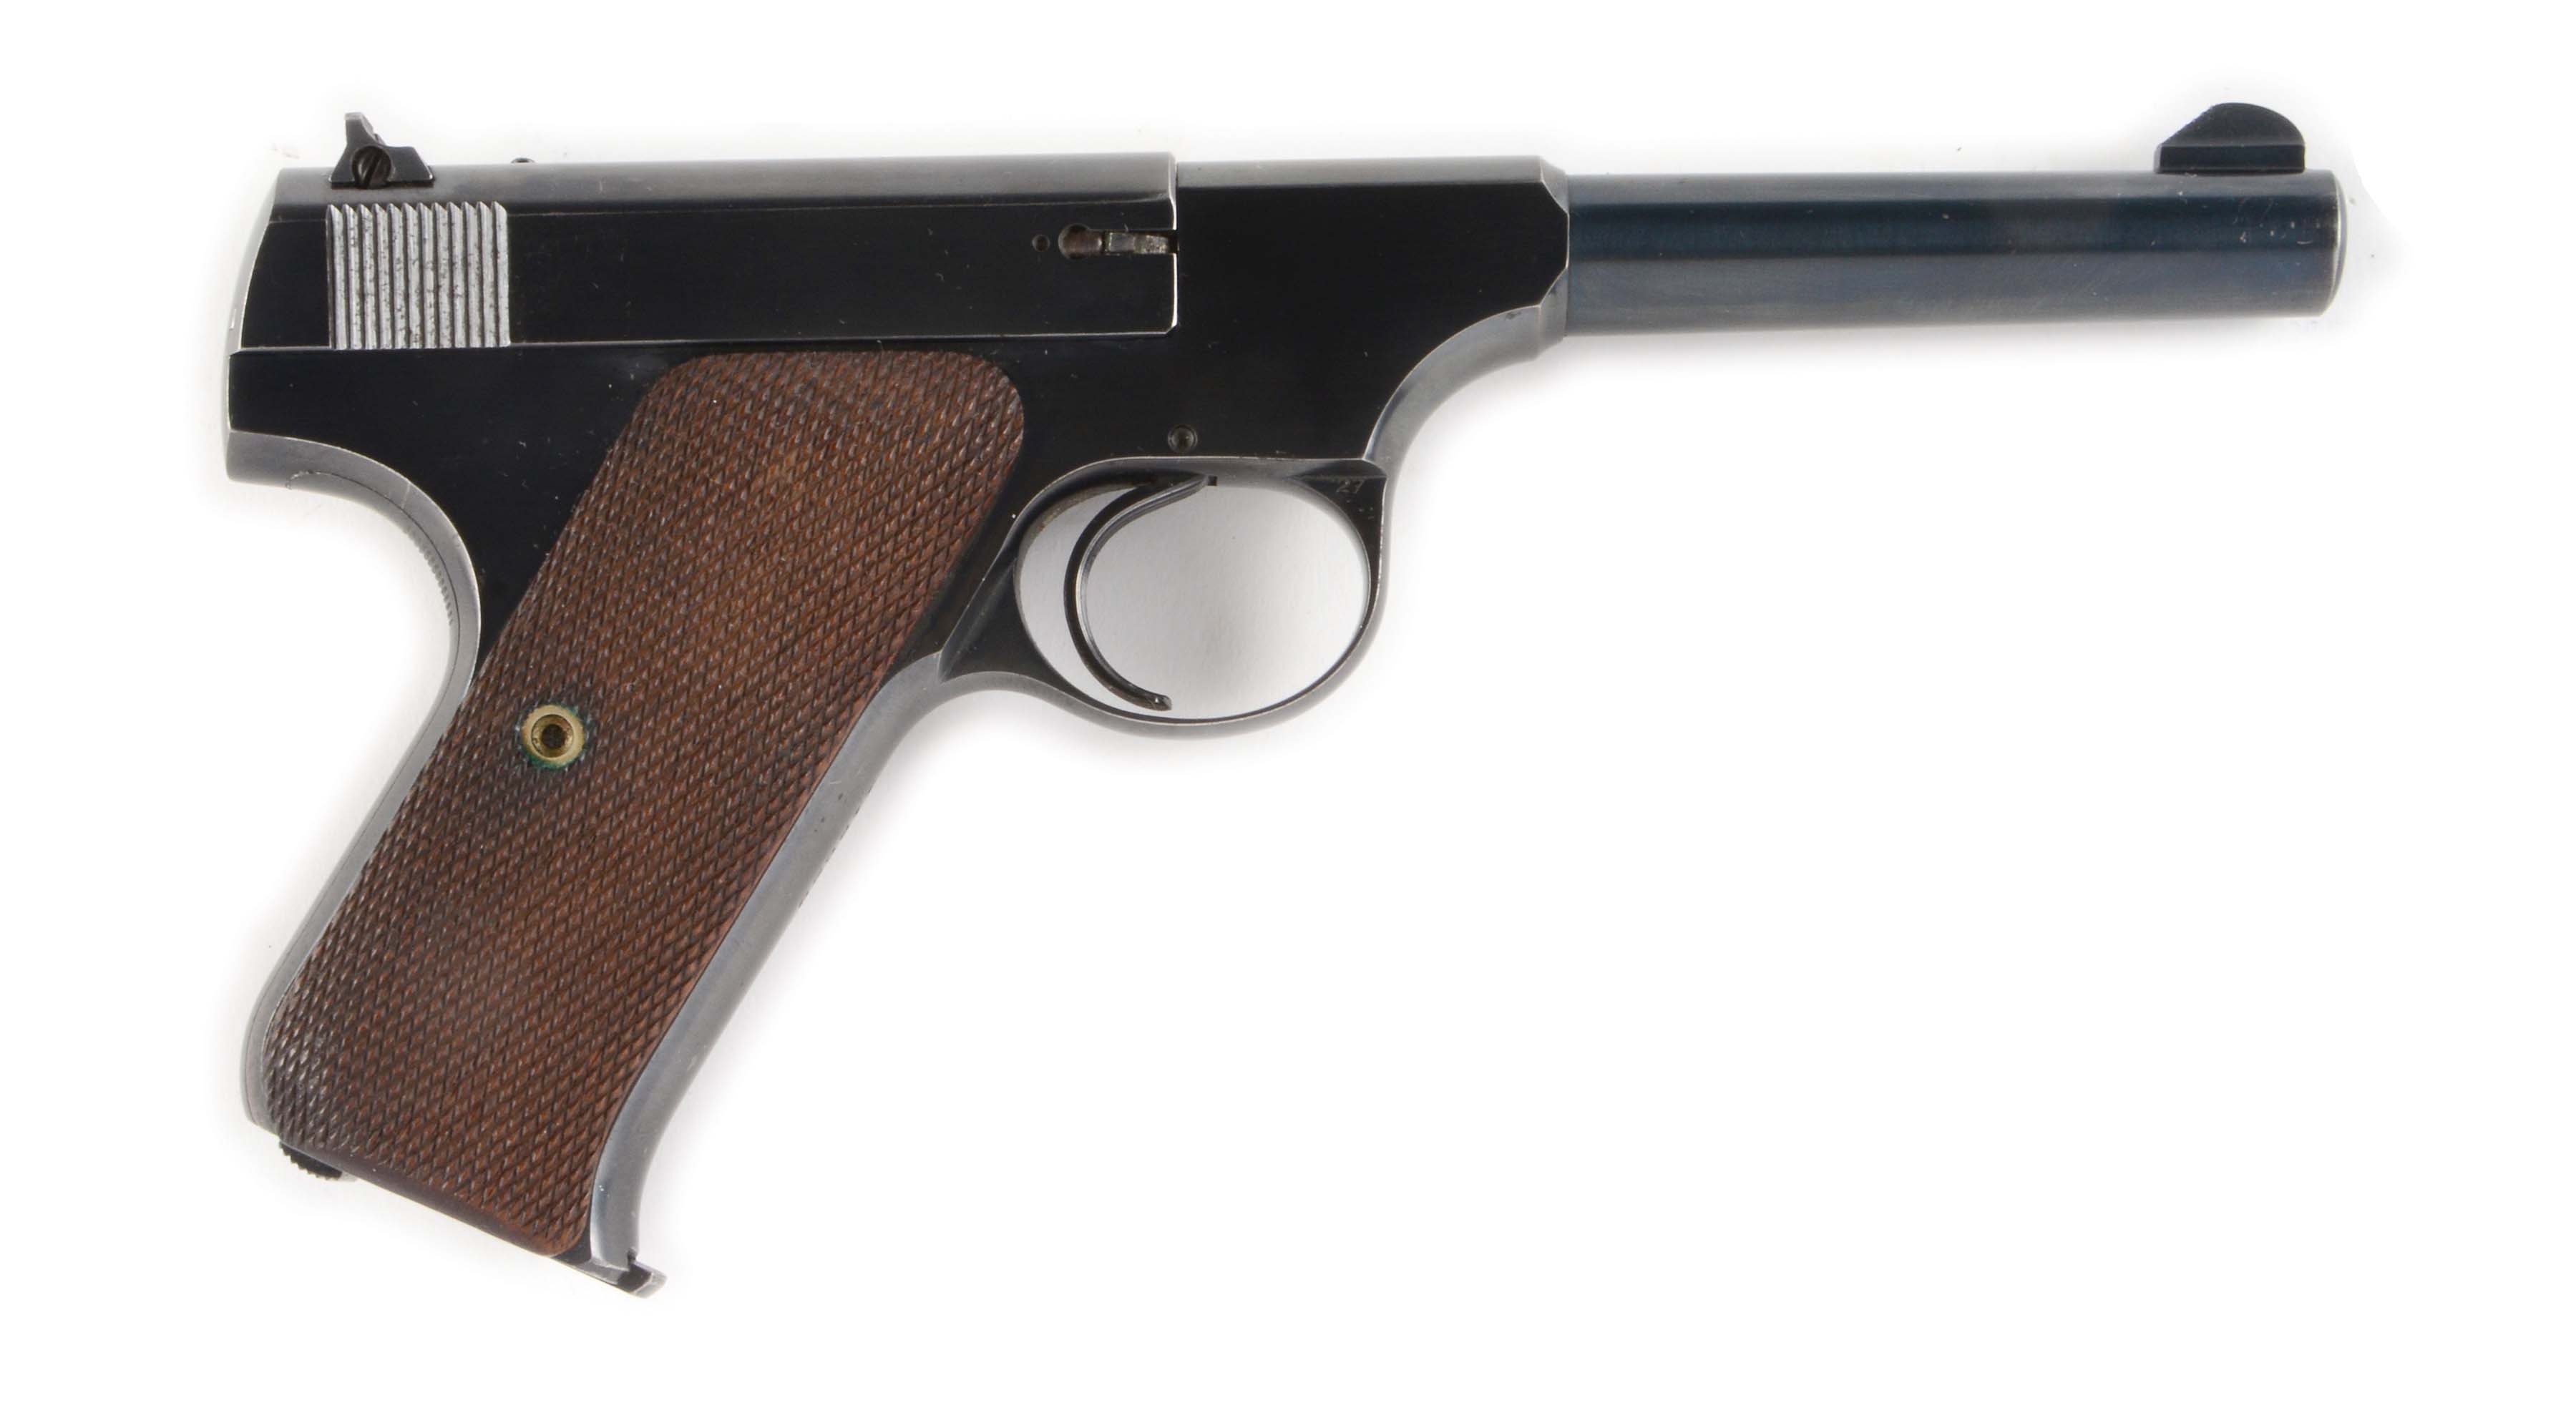 (C) BOXED PRE-WAR COLT WOODSMAN SPORT PISTOL WITH BOXED STOCK AND HOLSTER.